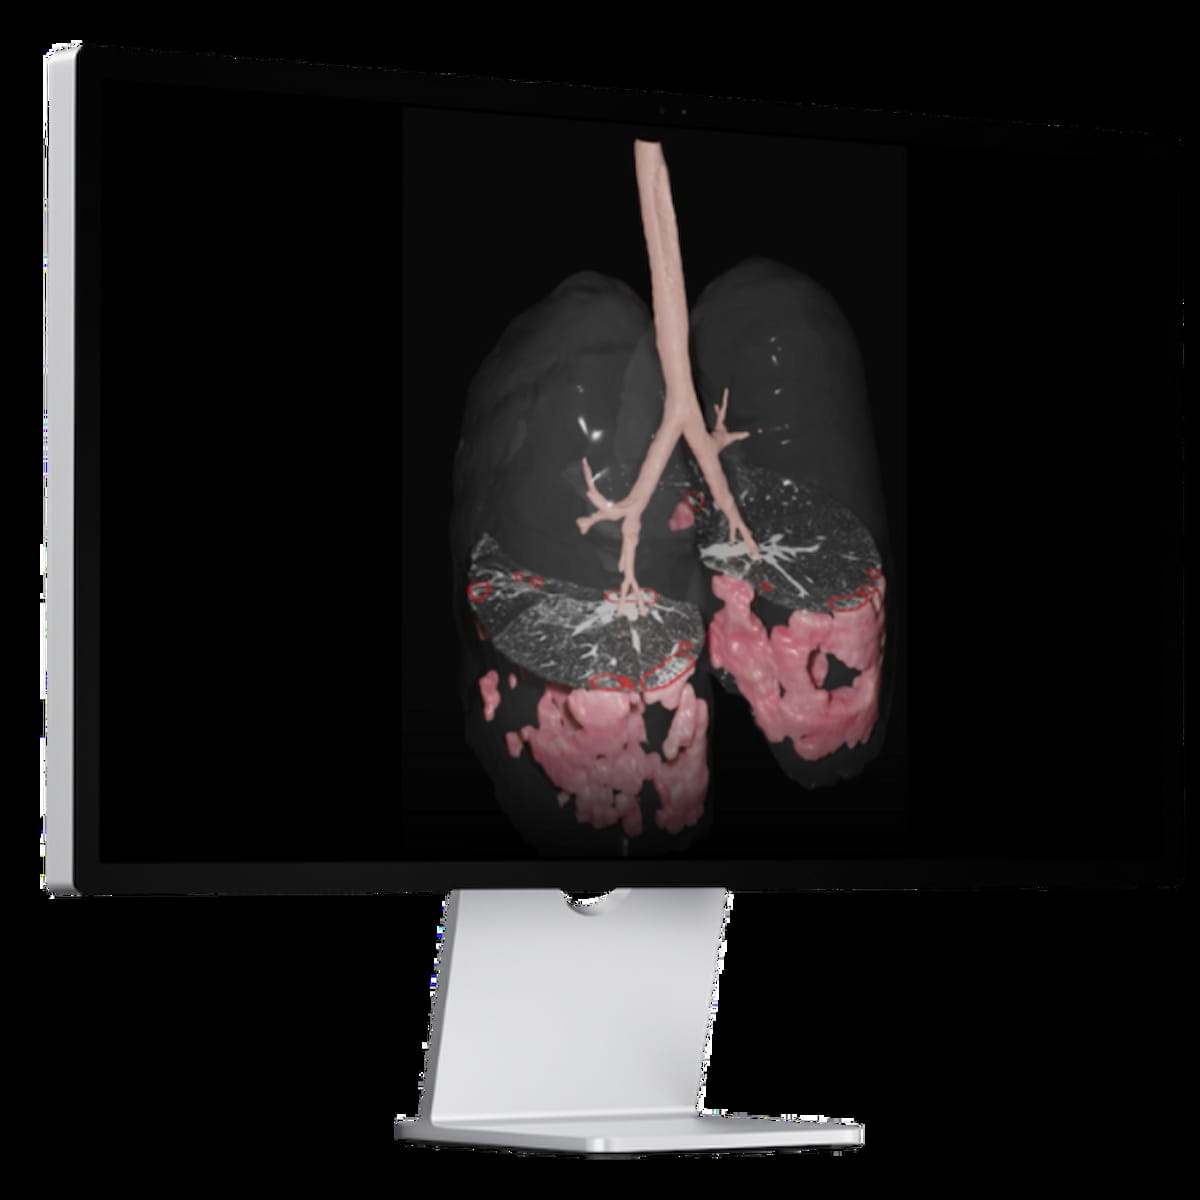 FDA Clears CT-Based AI Software for Assessing Interstitial Lung Disease